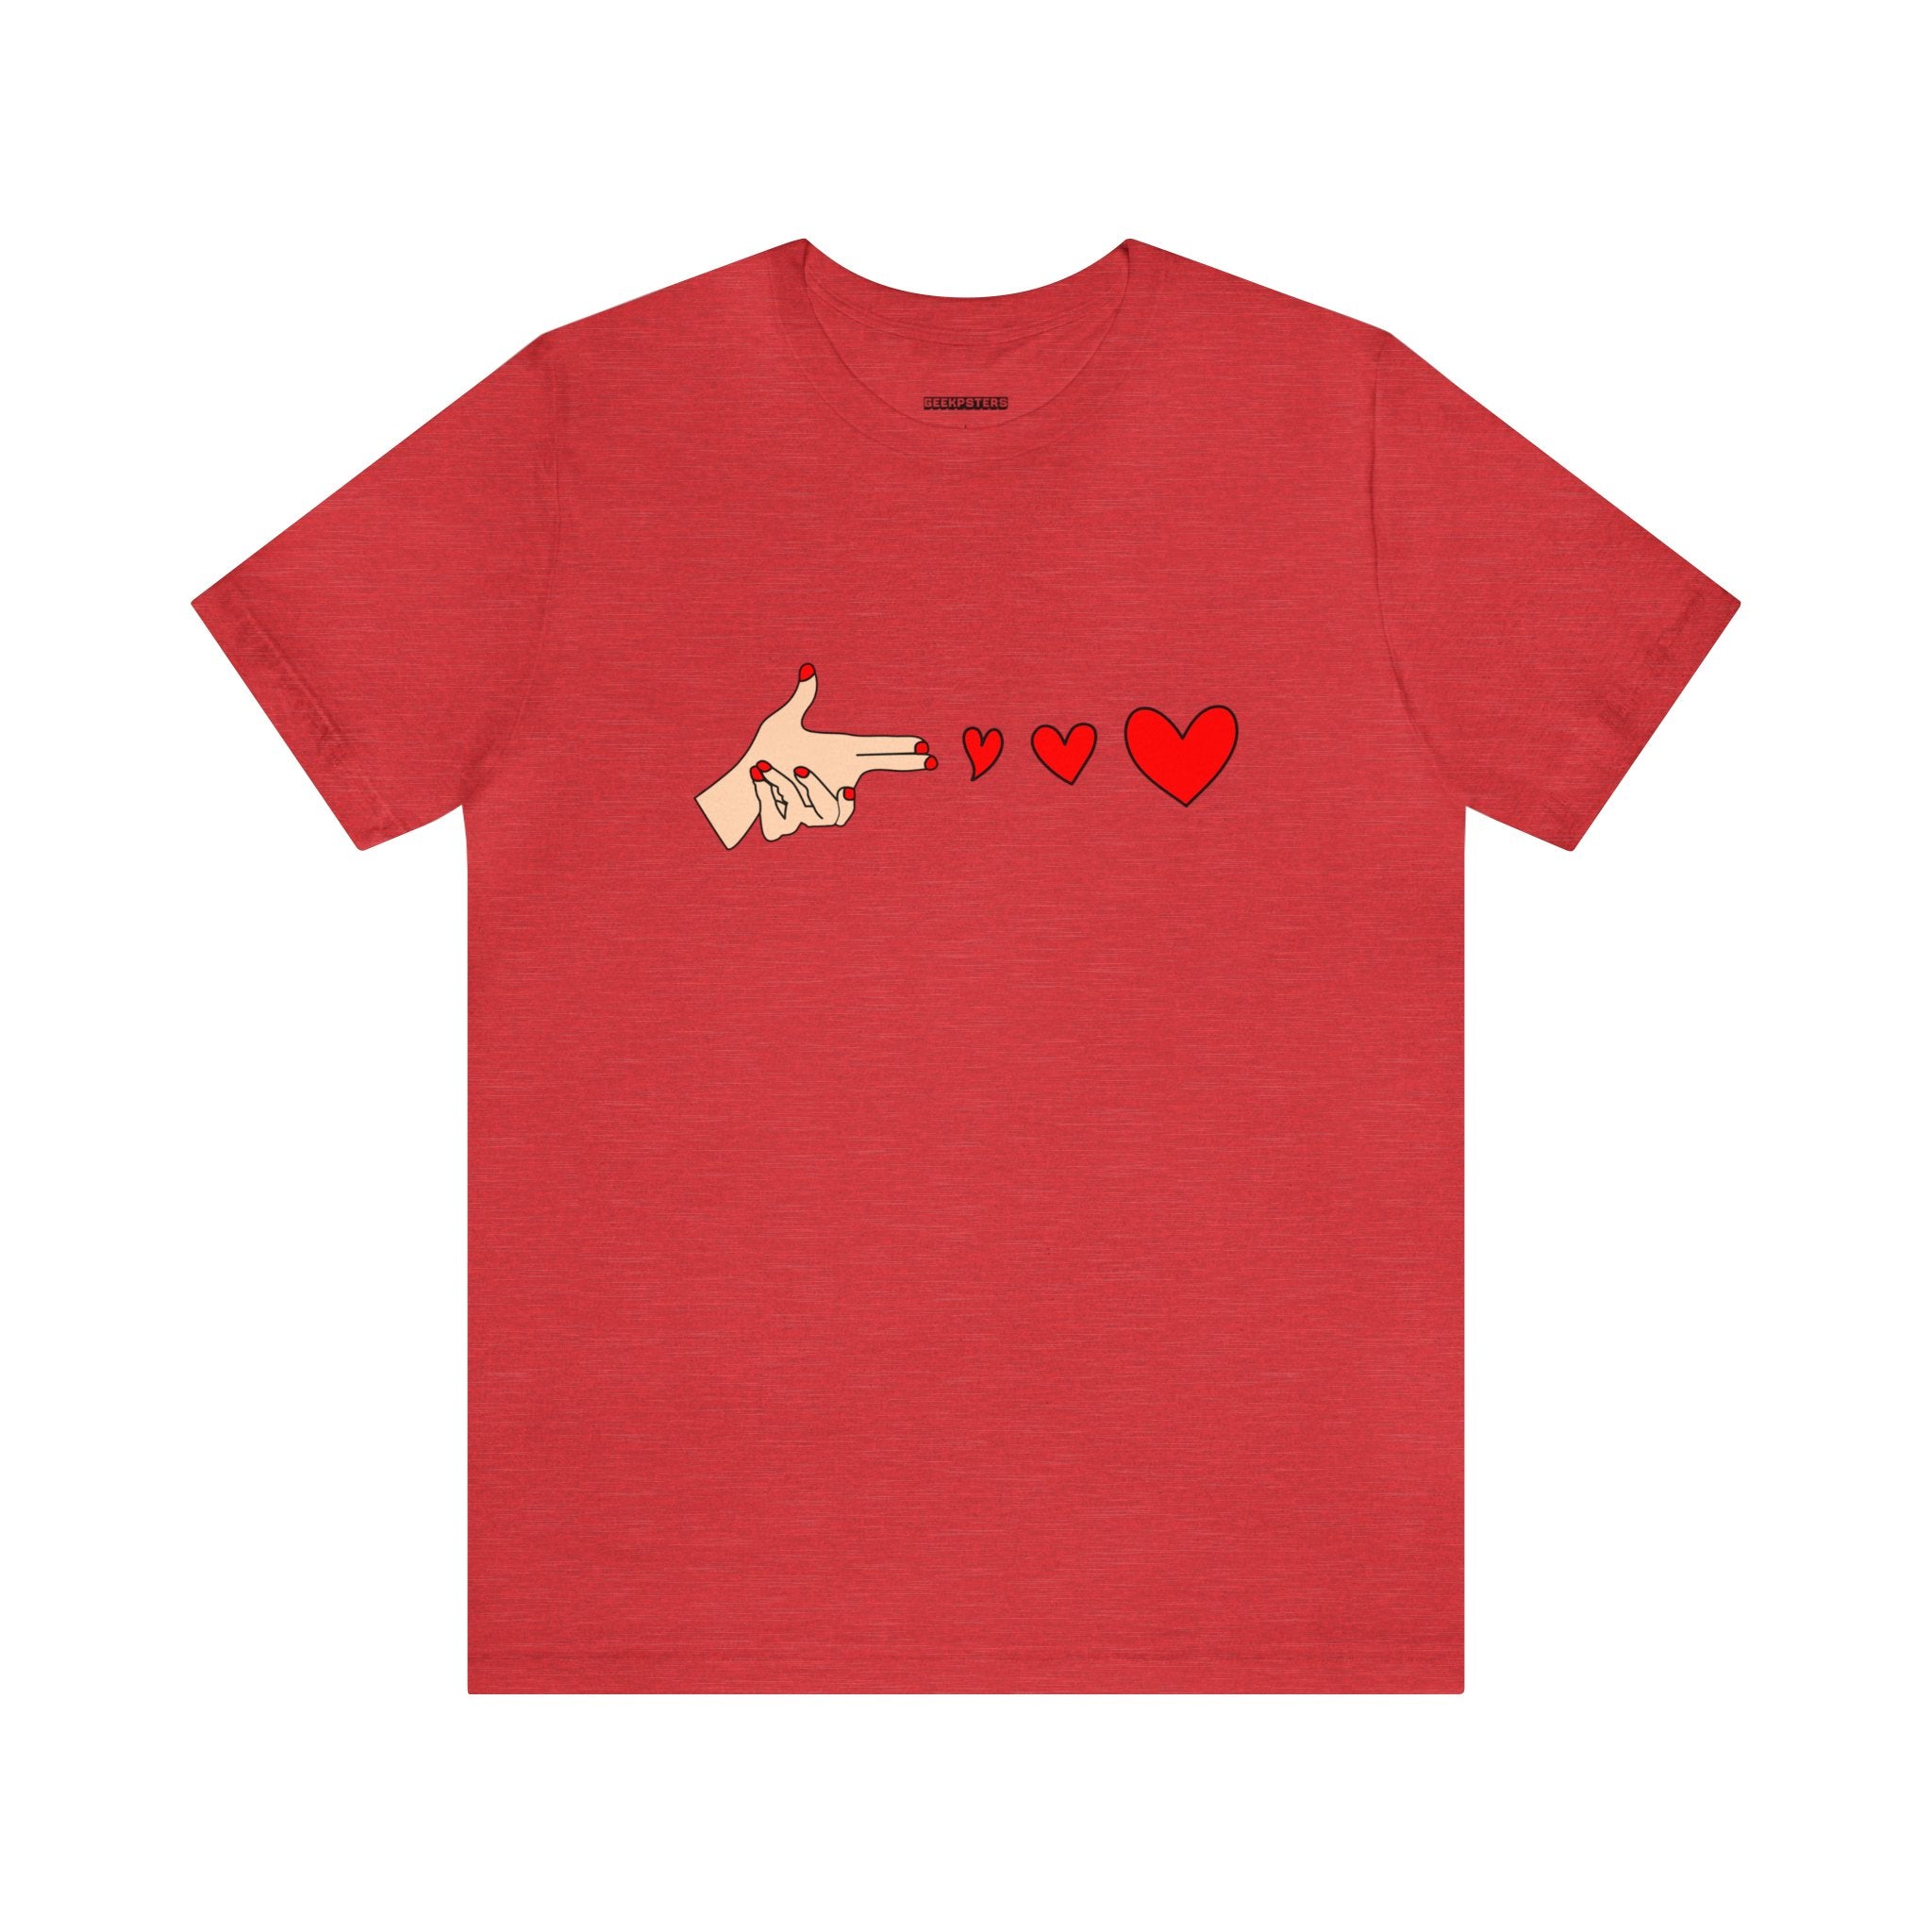 A statement Bang Bang T-Shirt featuring a heart and a pointing finger, embracing one's geeky side.